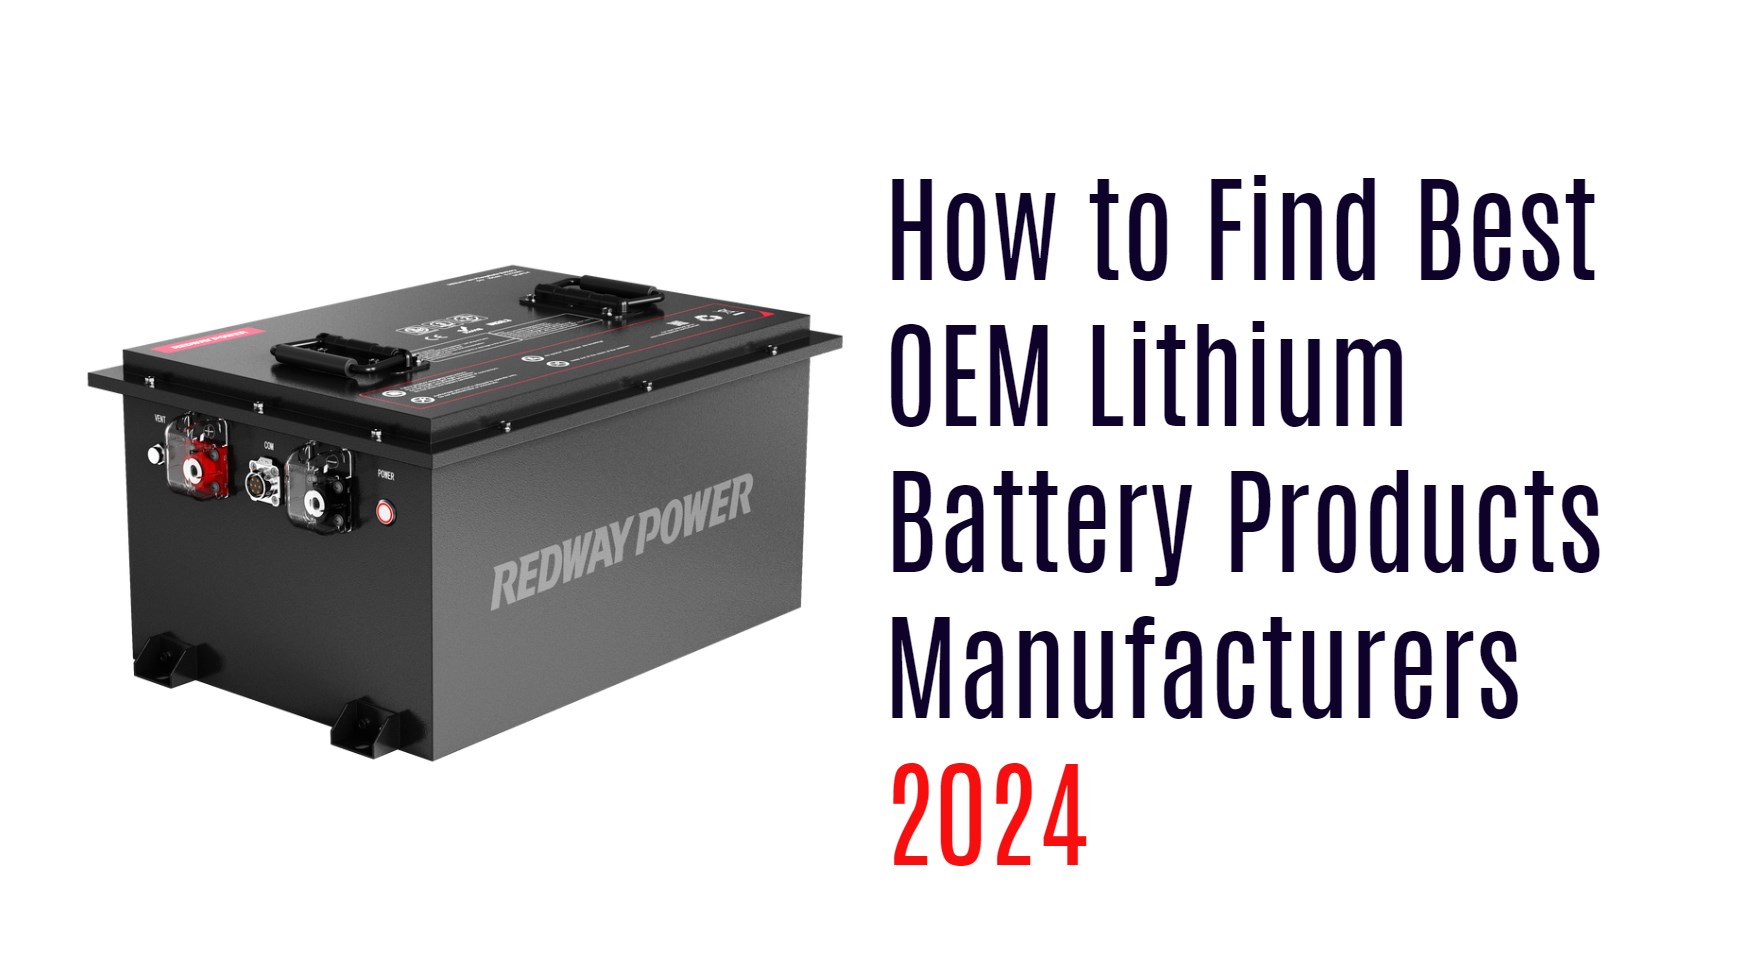 How to Find Best OEM Lithium ion Battery Products Manufacturers 2024? 48v 100ah golf cart battery lifepo4 oem factory bluetooth app